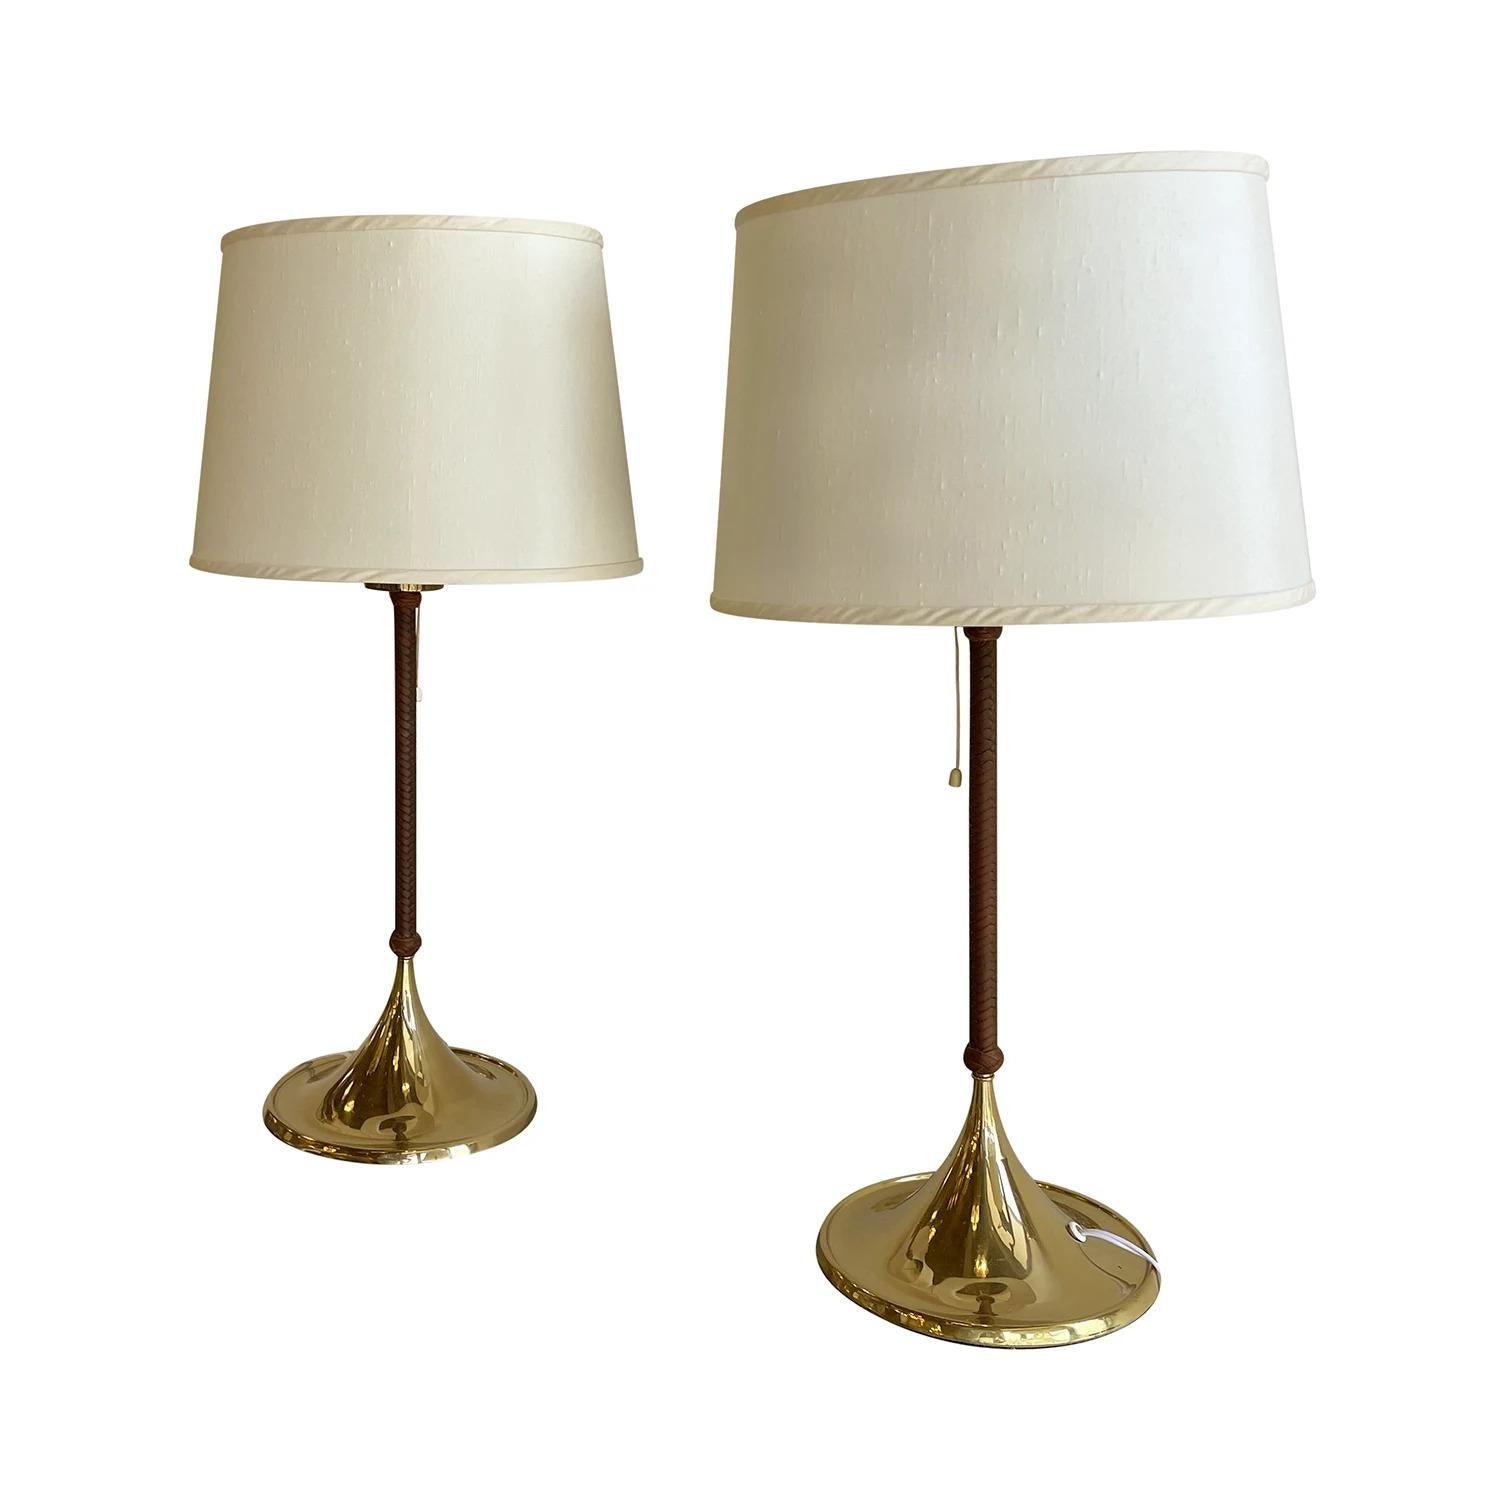 Hand-Crafted 20th Century Swedish Pair of Brass Table Lamps, Leather Lights by Bergboms